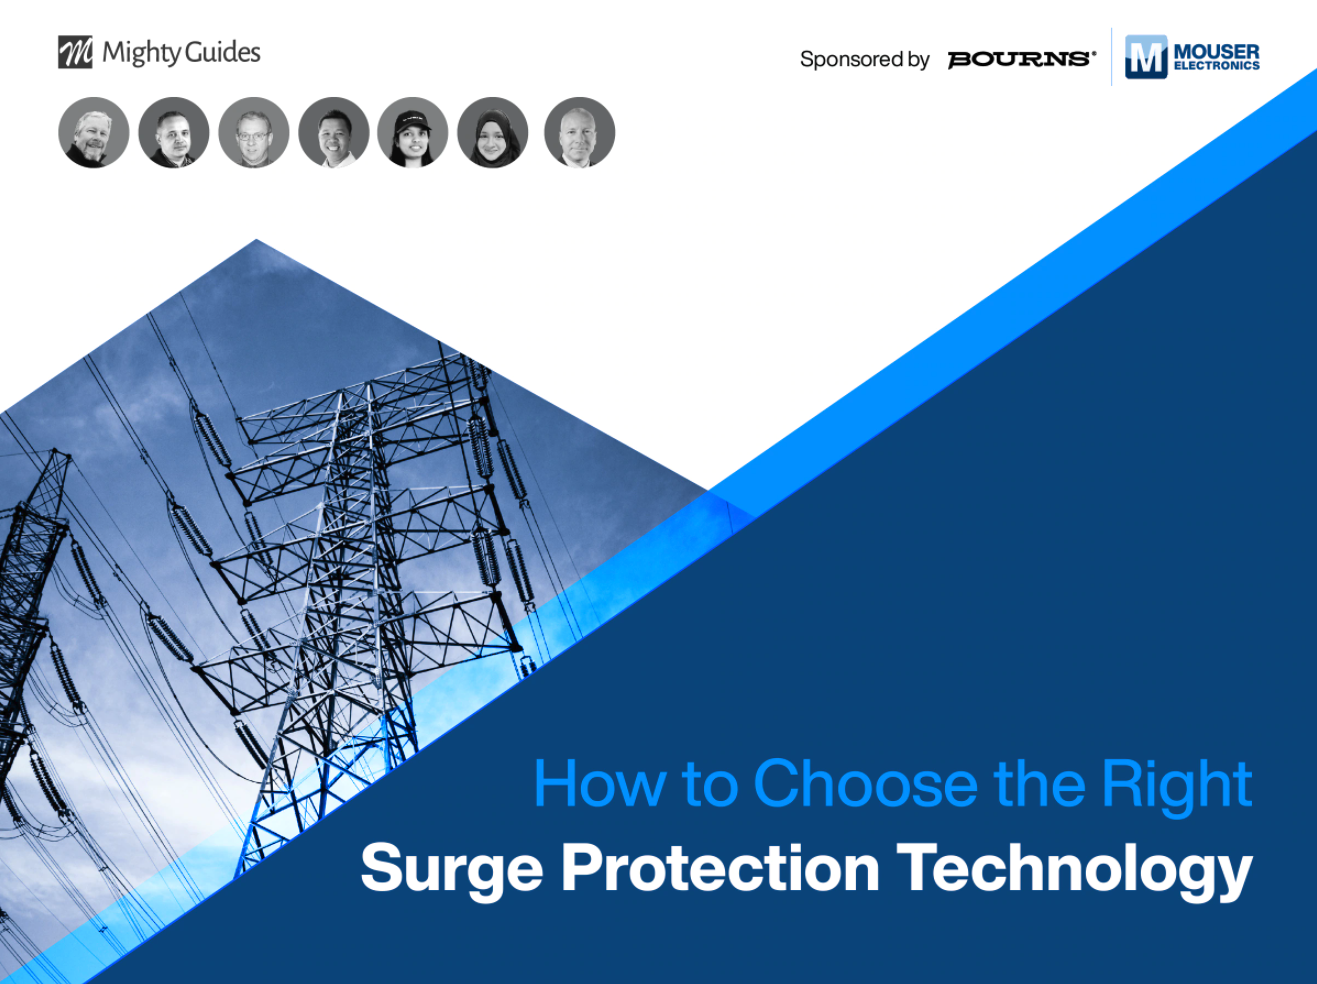 Bourns and Mouser Electronics: How to Choose the Right Surge Protection Technology